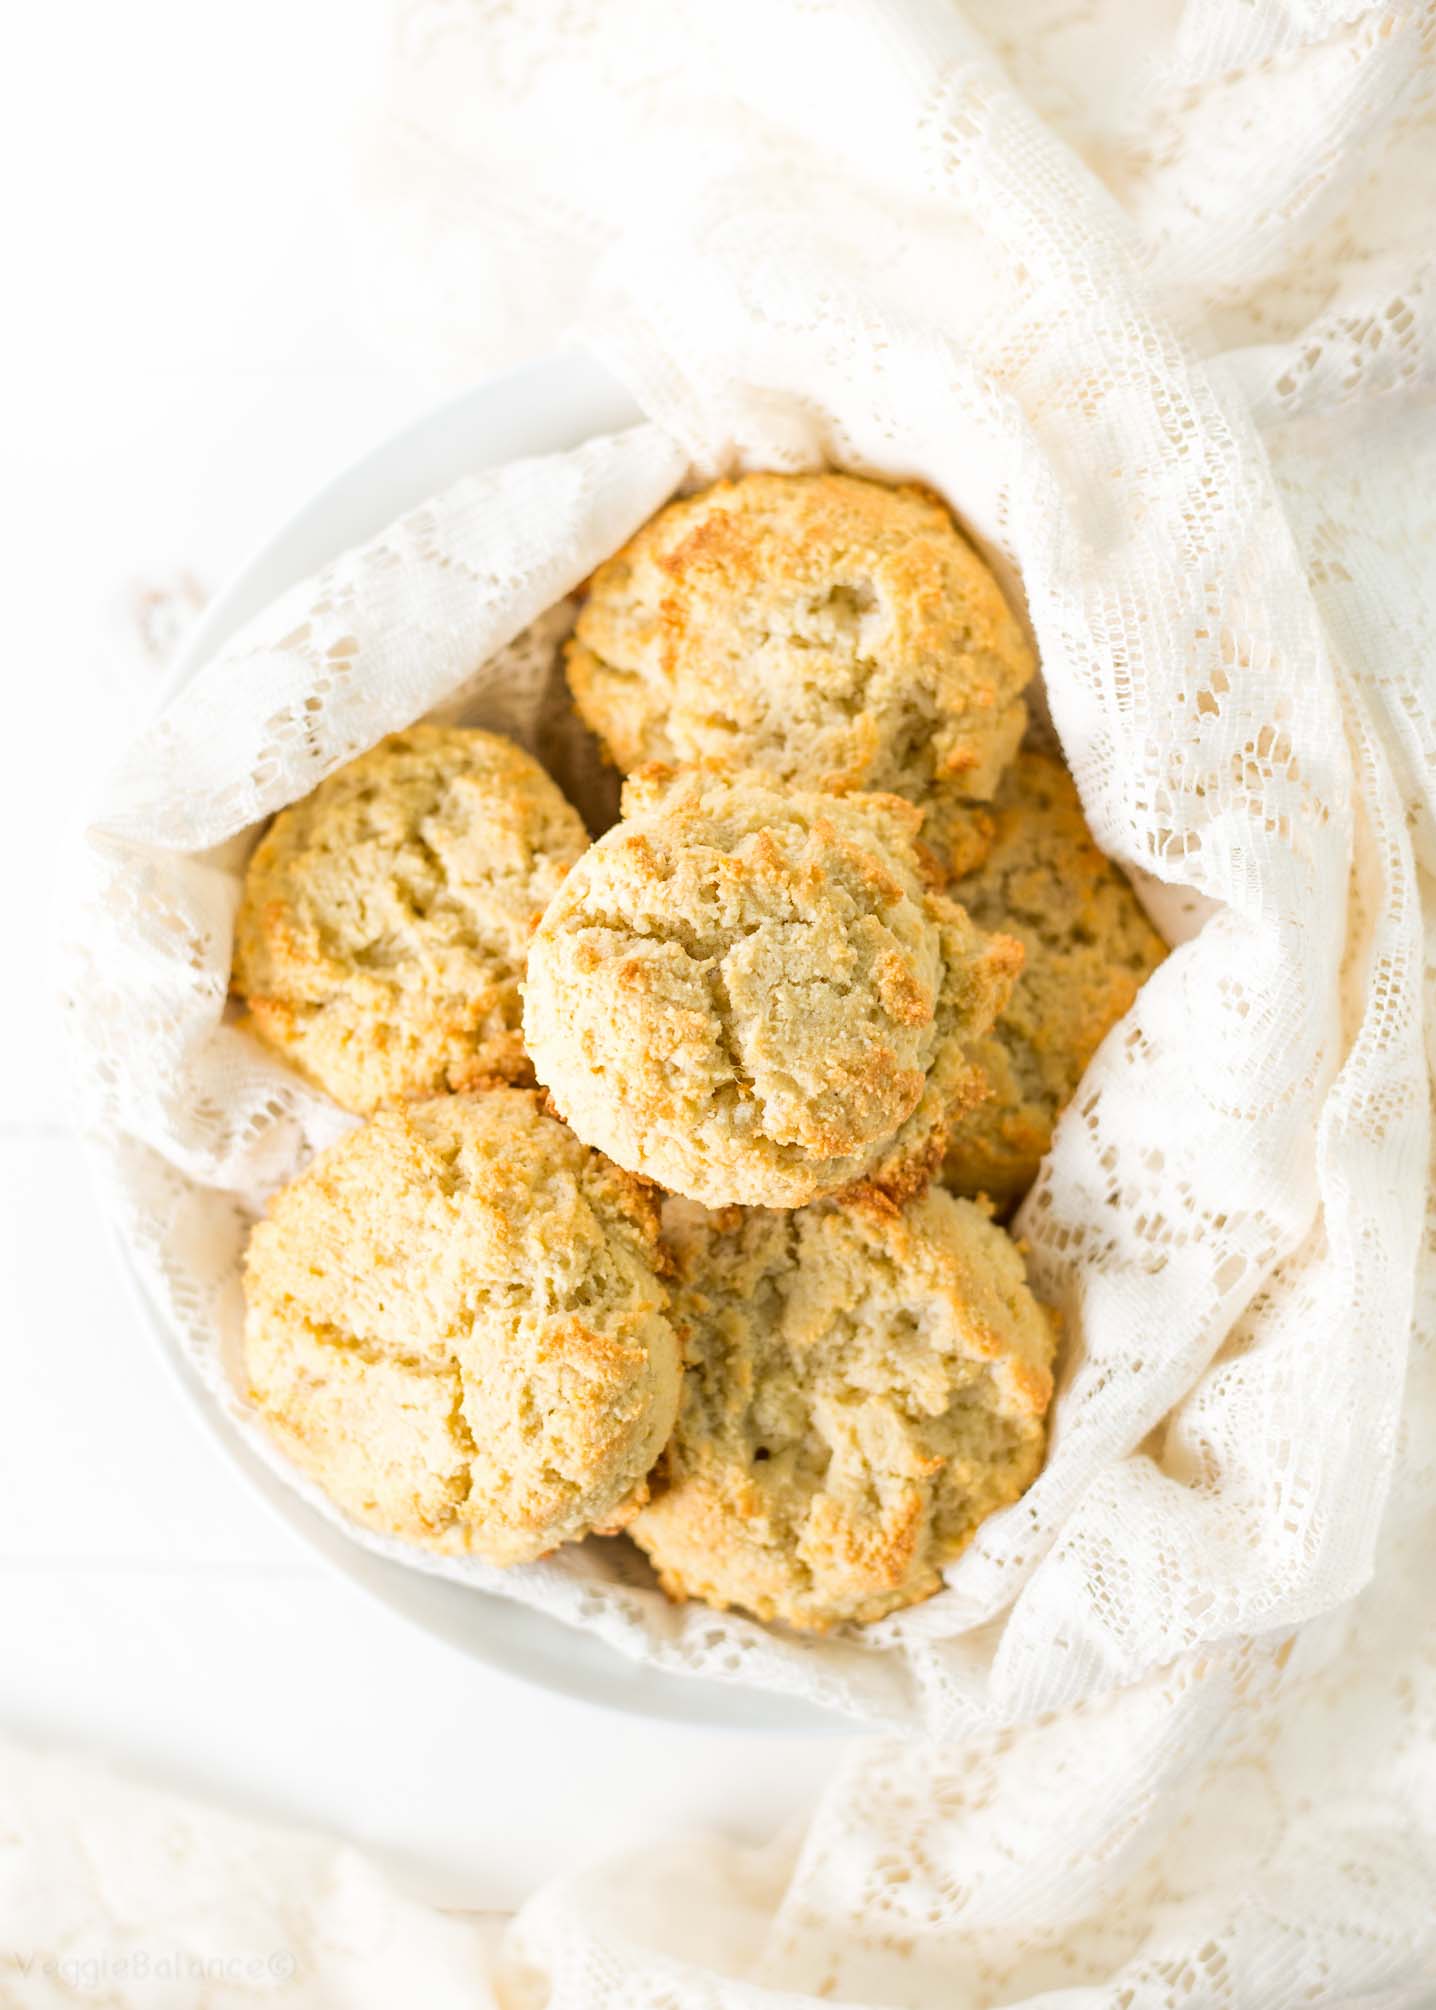 Almond Flour Biscuits (Healthy Low Carb Biscuits)